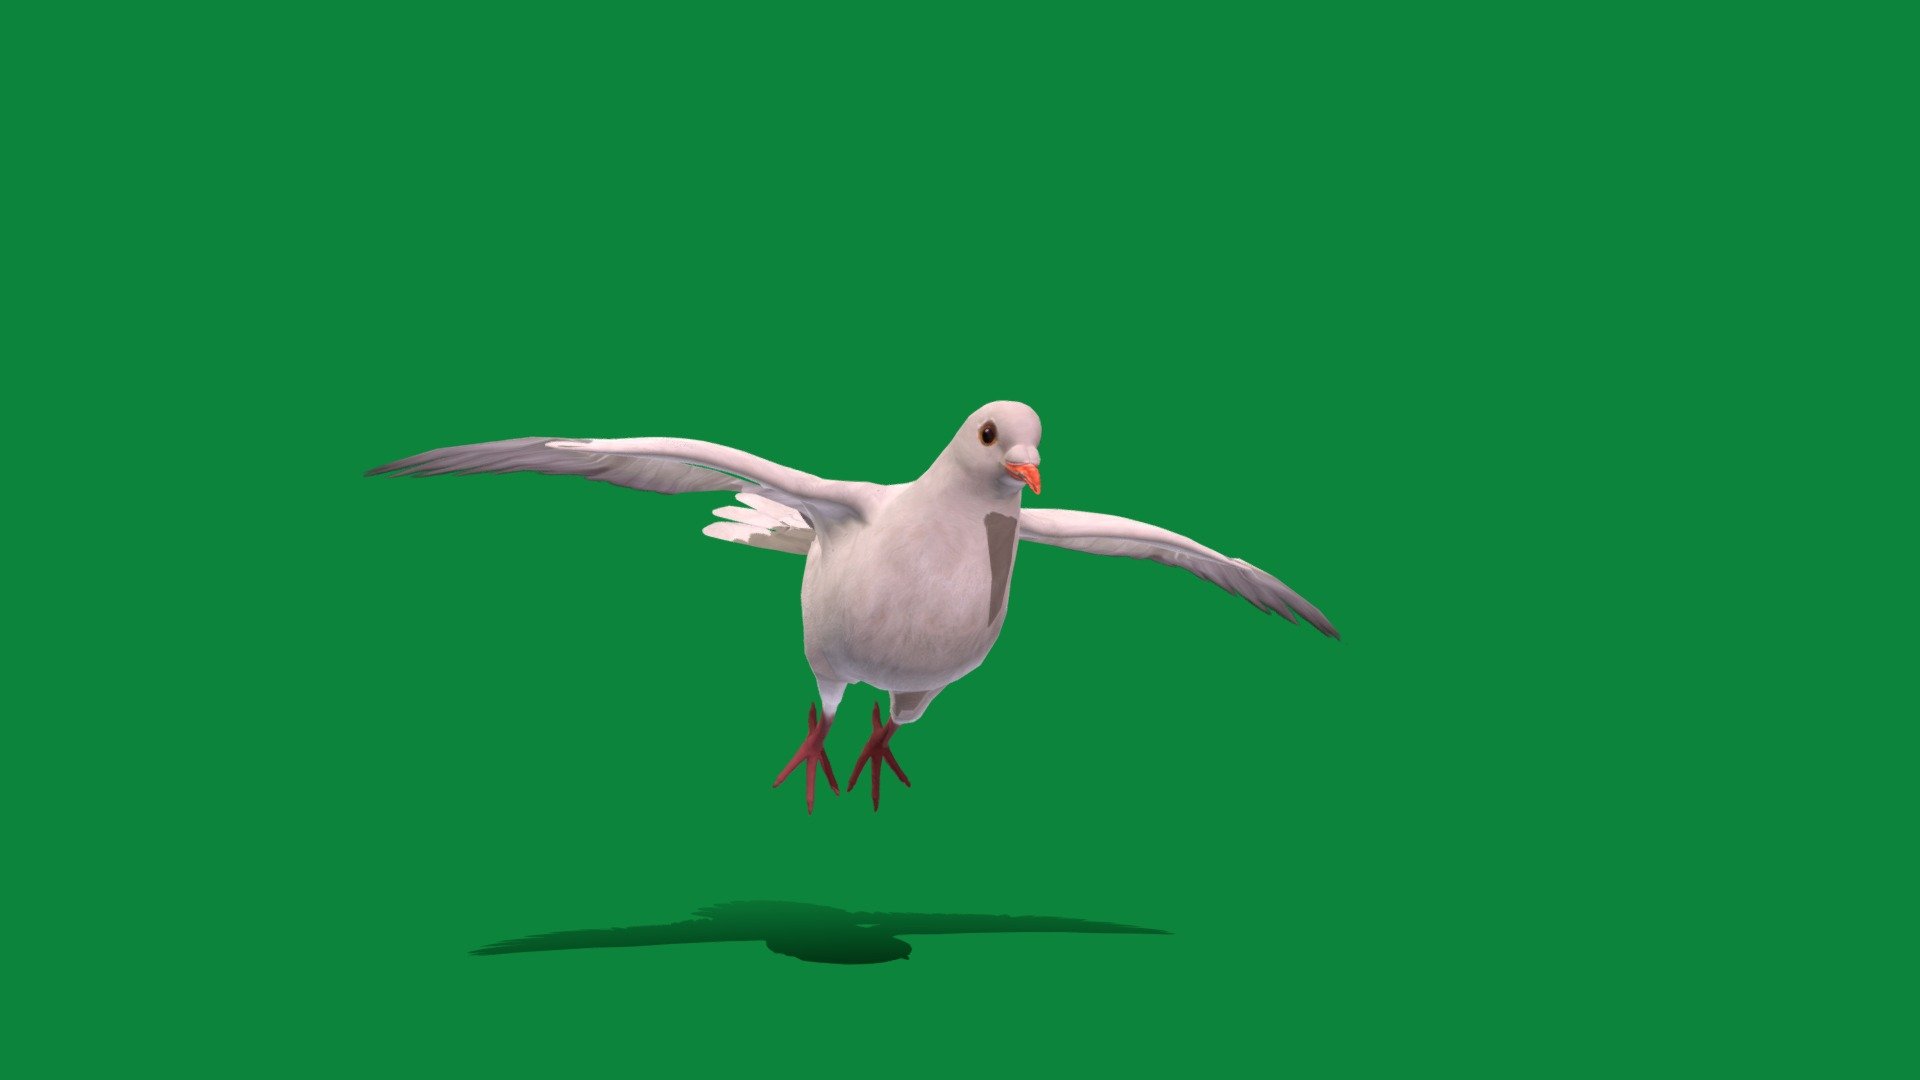 White-winged Dove Bird (Columbidae)Mourning Dove,United States,Caribbean

Zenaida asiatica Animal Bird(White Bird )Pet,Cute

1 Draw Calls

LowPoly

Game Ready (Character)

Subdivision Surface Ready

5 Animations 

4K PBR Textures 1 Material

Unreal/Unity FBX 

Blend File 3.6.5 LTS / 4 Plus

USDZ File (AR Ready). Real Scale Dimension (Xcode ,Reality Composer, Keynote Ready)

Textures Files

GLB File (Unreal 5.1 Plus Native Support,Godot)

Gltf File (Spark AR, Lens Studio(SnapChat),Effector(Tiktok),Spline,Play Canvas,Omiverse)Compatible

Alembic File (ABC)

Triangles -9336

Faces -5167

Edges -10837

Vertices -5694

Diffuse, Metallic, Roughness , Normal Map ,Specular Map,AO

The white-winged dove is a dove whose native range extends from the Southwestern United States through Mexico,Central America, the Caribbean.Large for doves,can be distinguished from similar doves by the distinctive white edge on their wings.They have a blue eyering,  red eyes 3d model